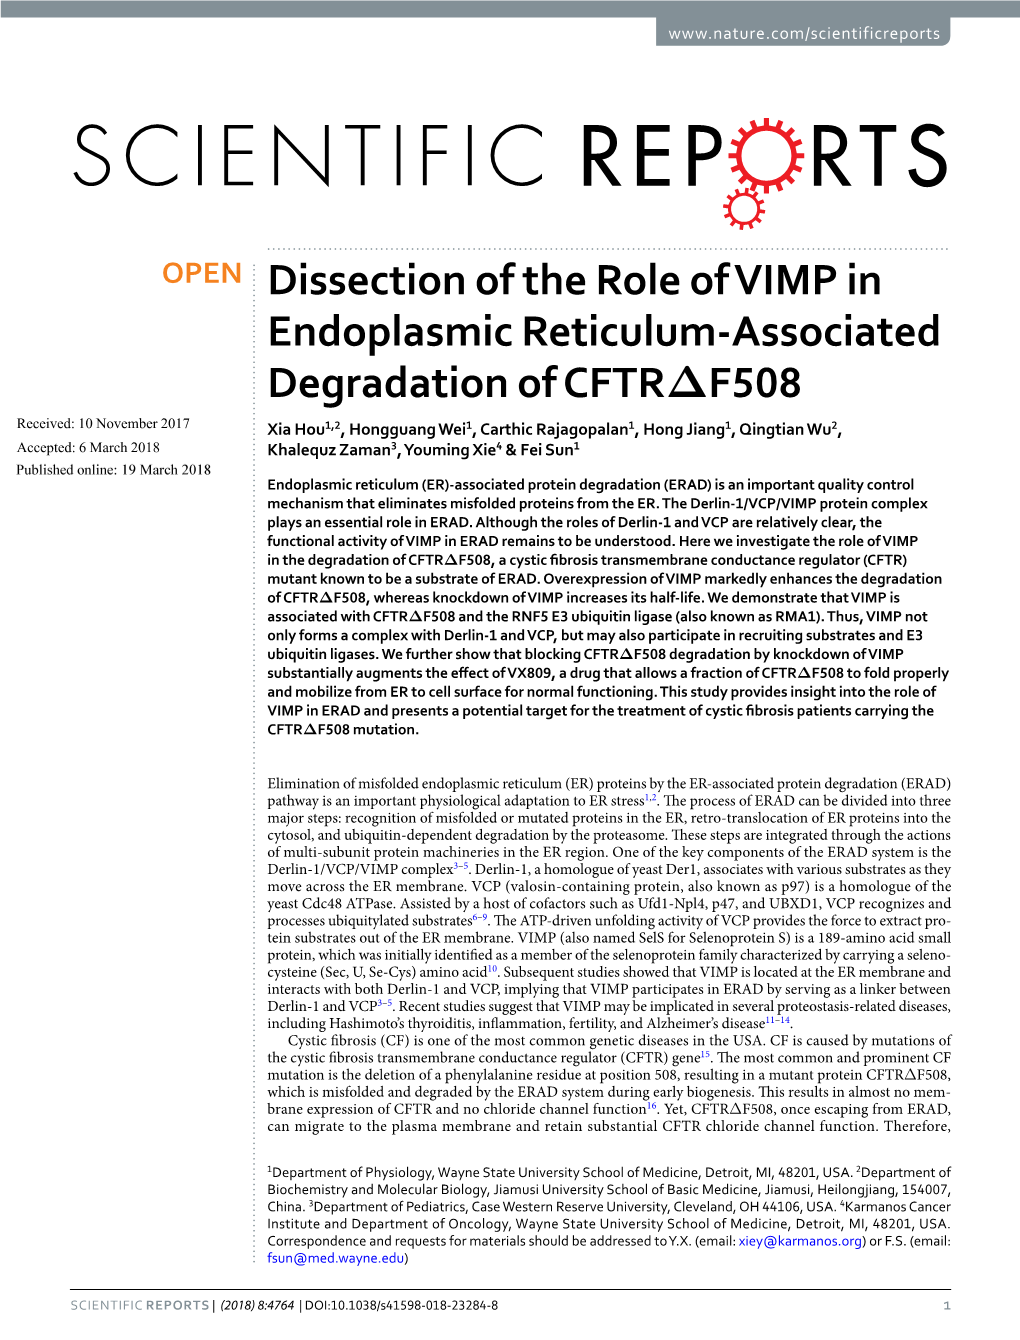 Dissection of the Role of VIMP in Endoplasmic Reticulum-Associated